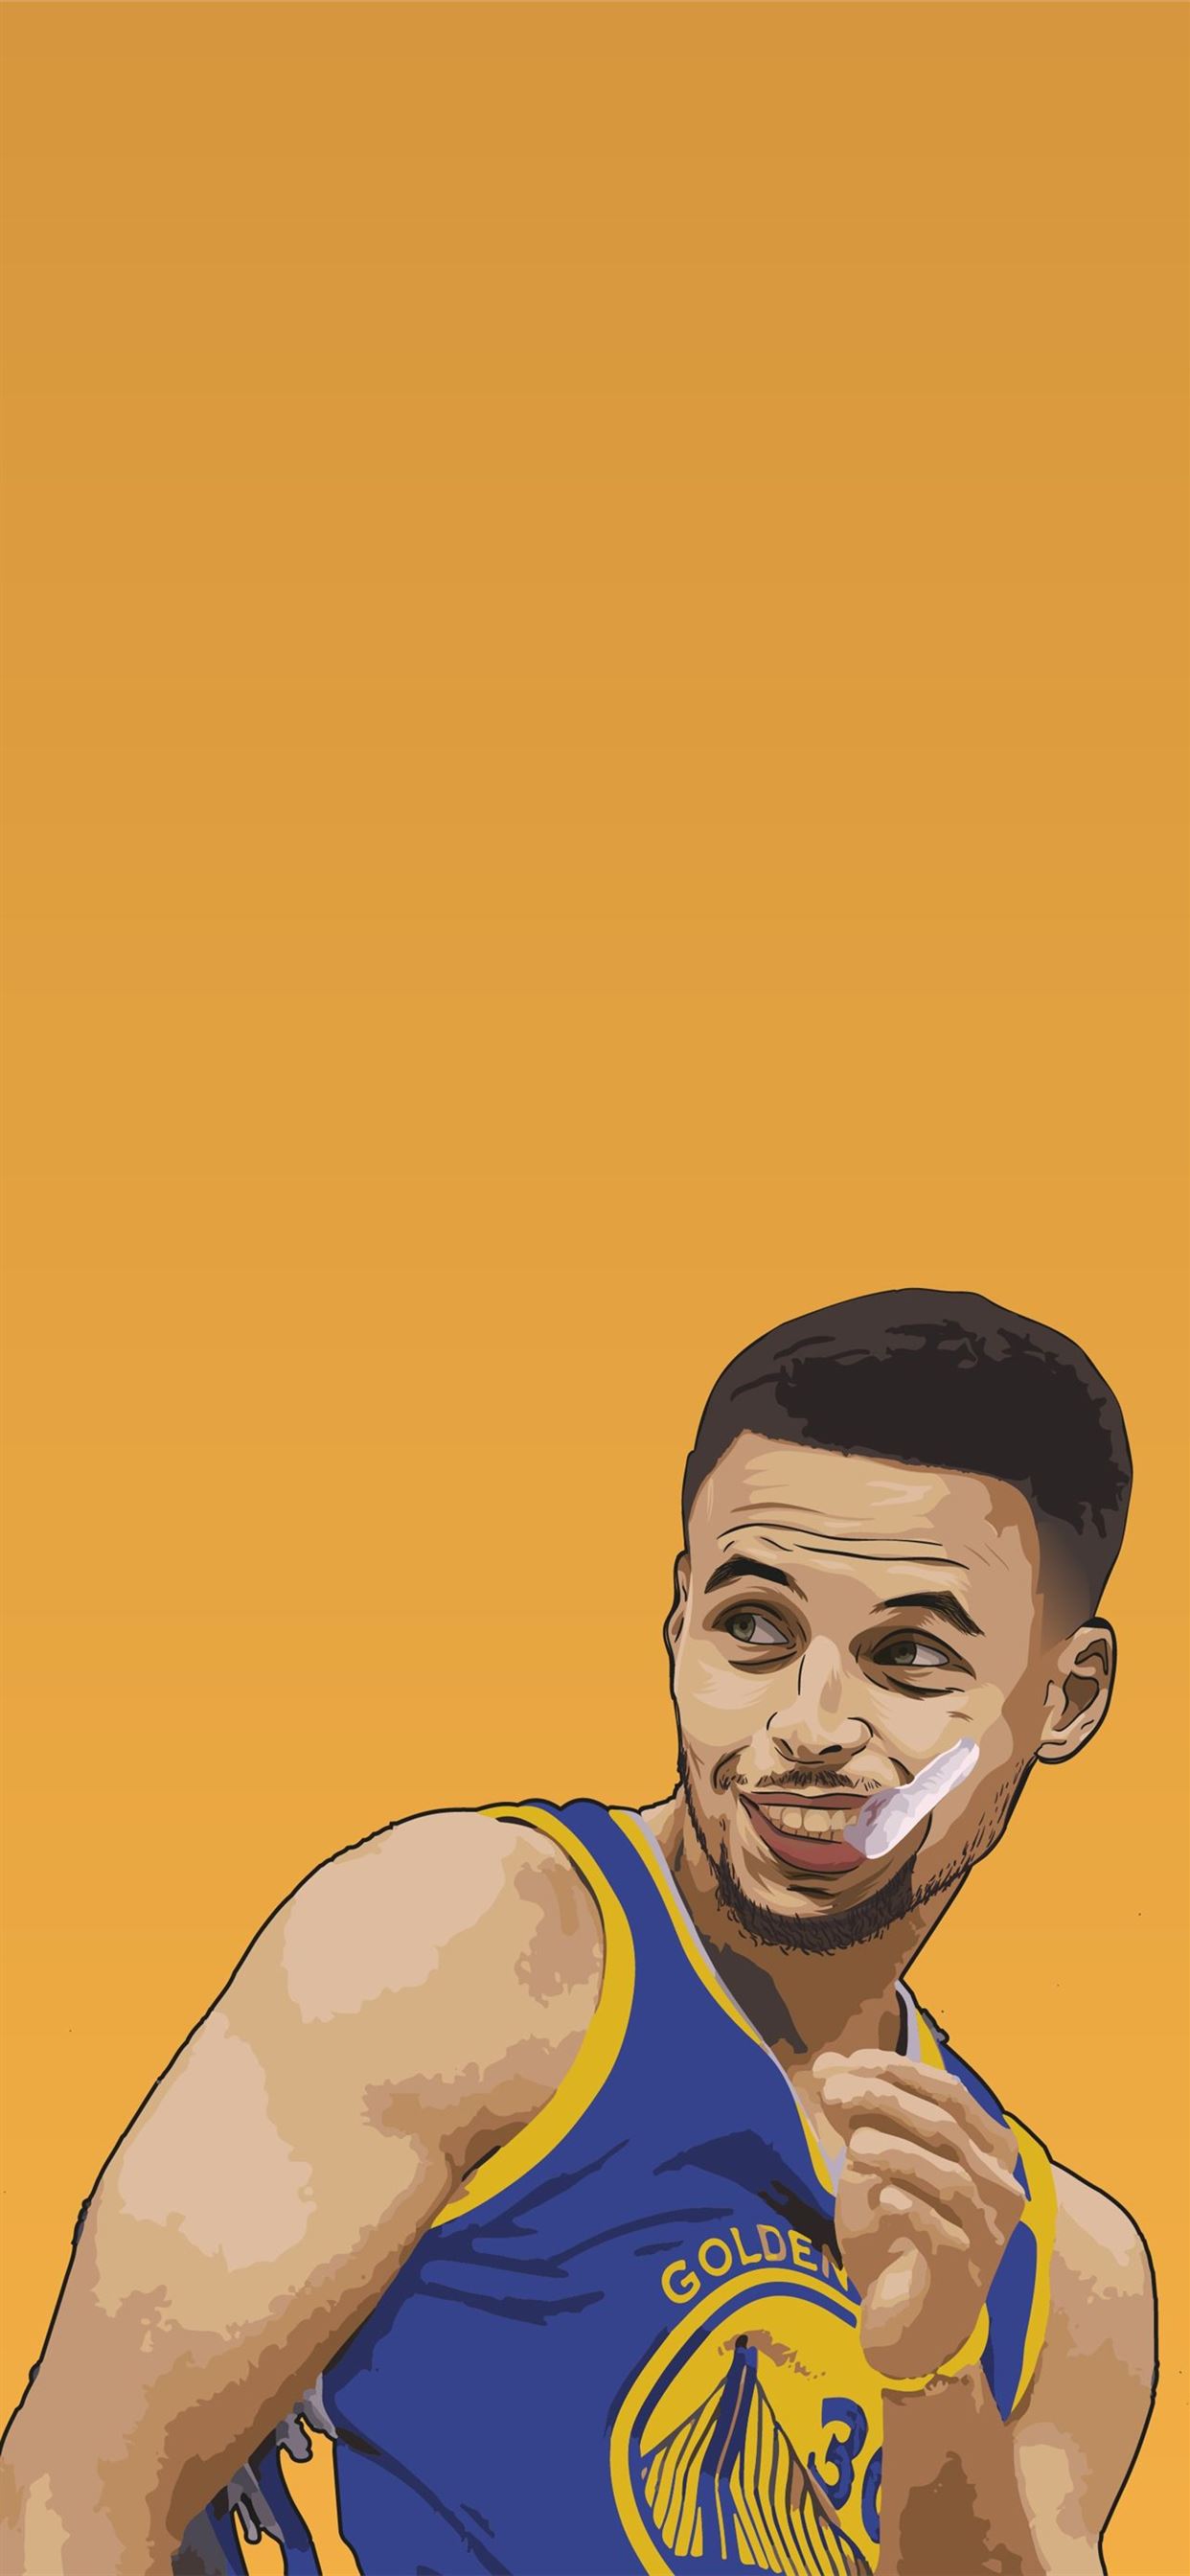 37+ Stephen Curry Wallpapers: HD, 4K, 5K for PC and Mobile | Download free  images for iPhone, Android